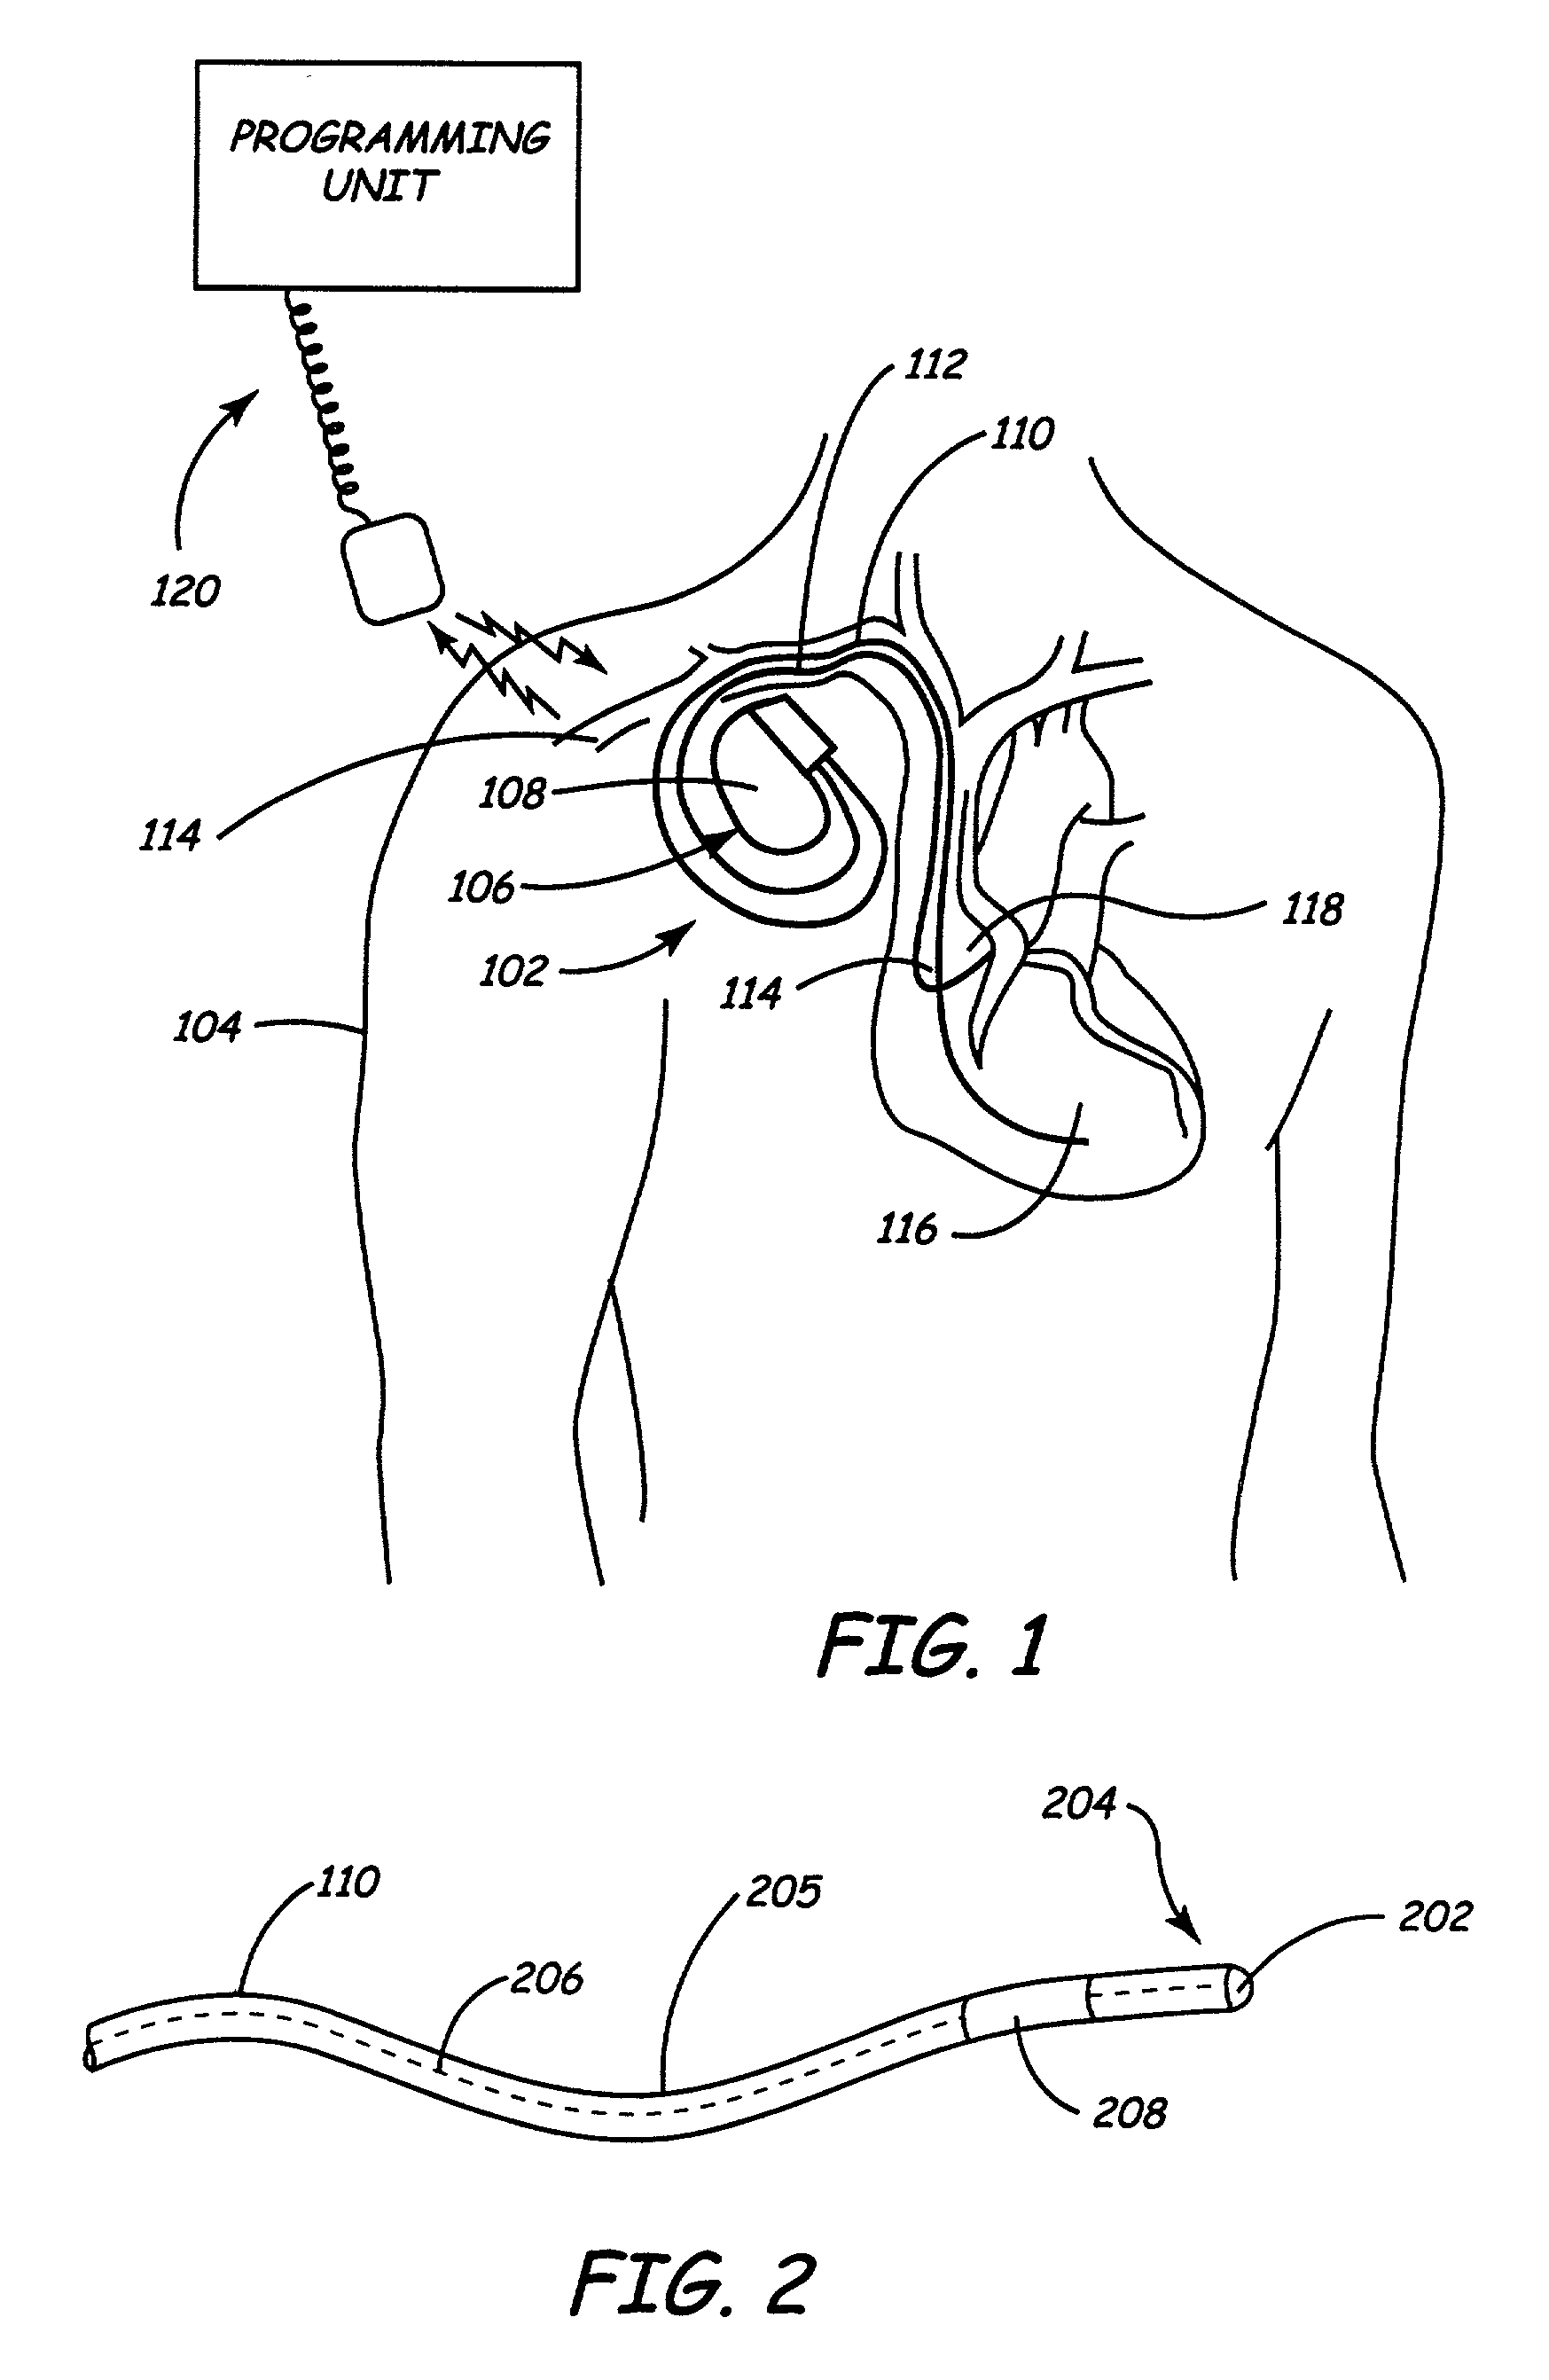 Method and apparatus for shunting induced currents in an electrical lead